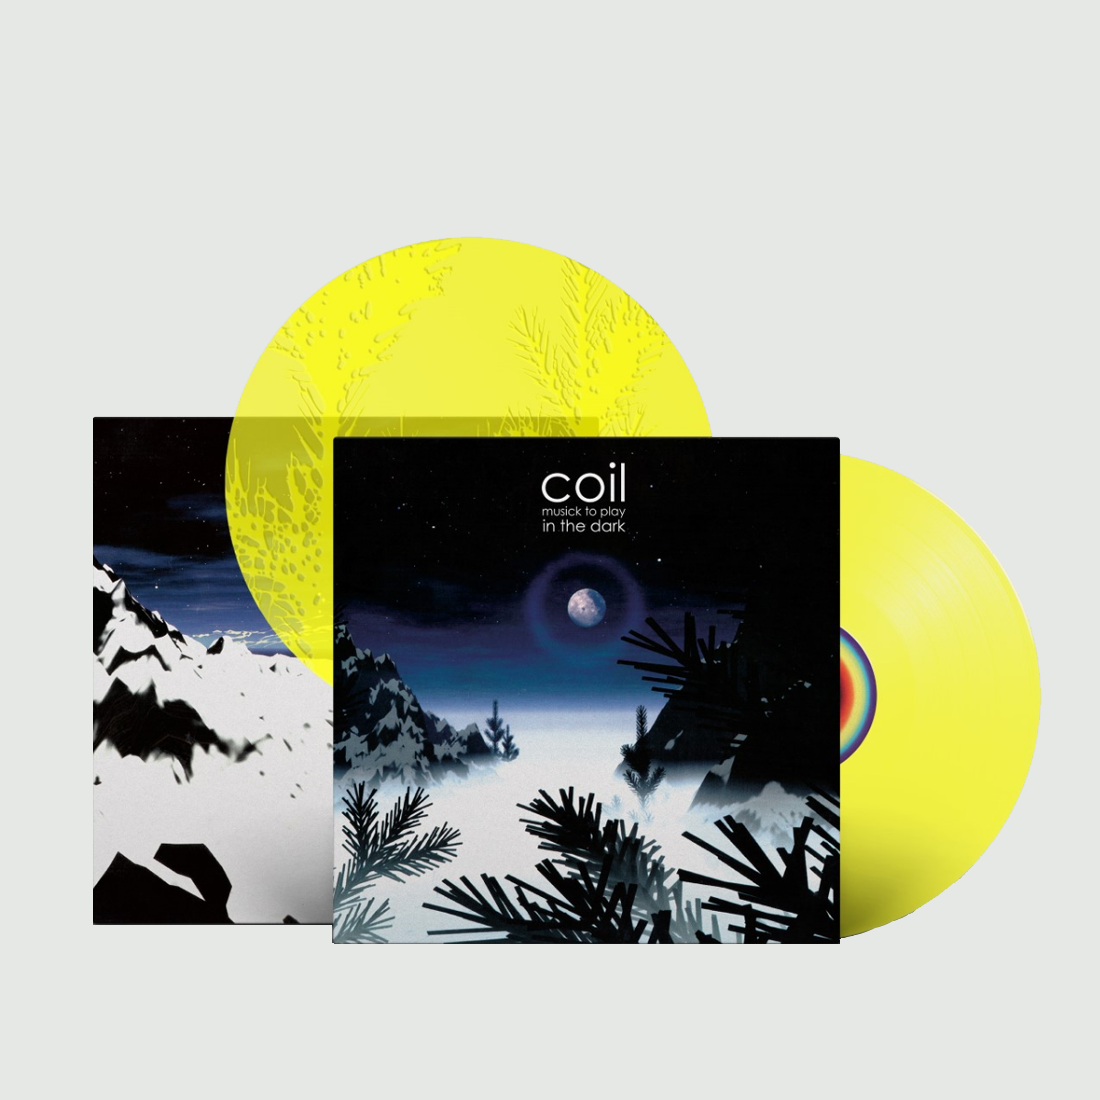 Coil - musick to play in the dark "Reissue" (Limited Edition of 2000 on Double Clear Yellow Vinyl)